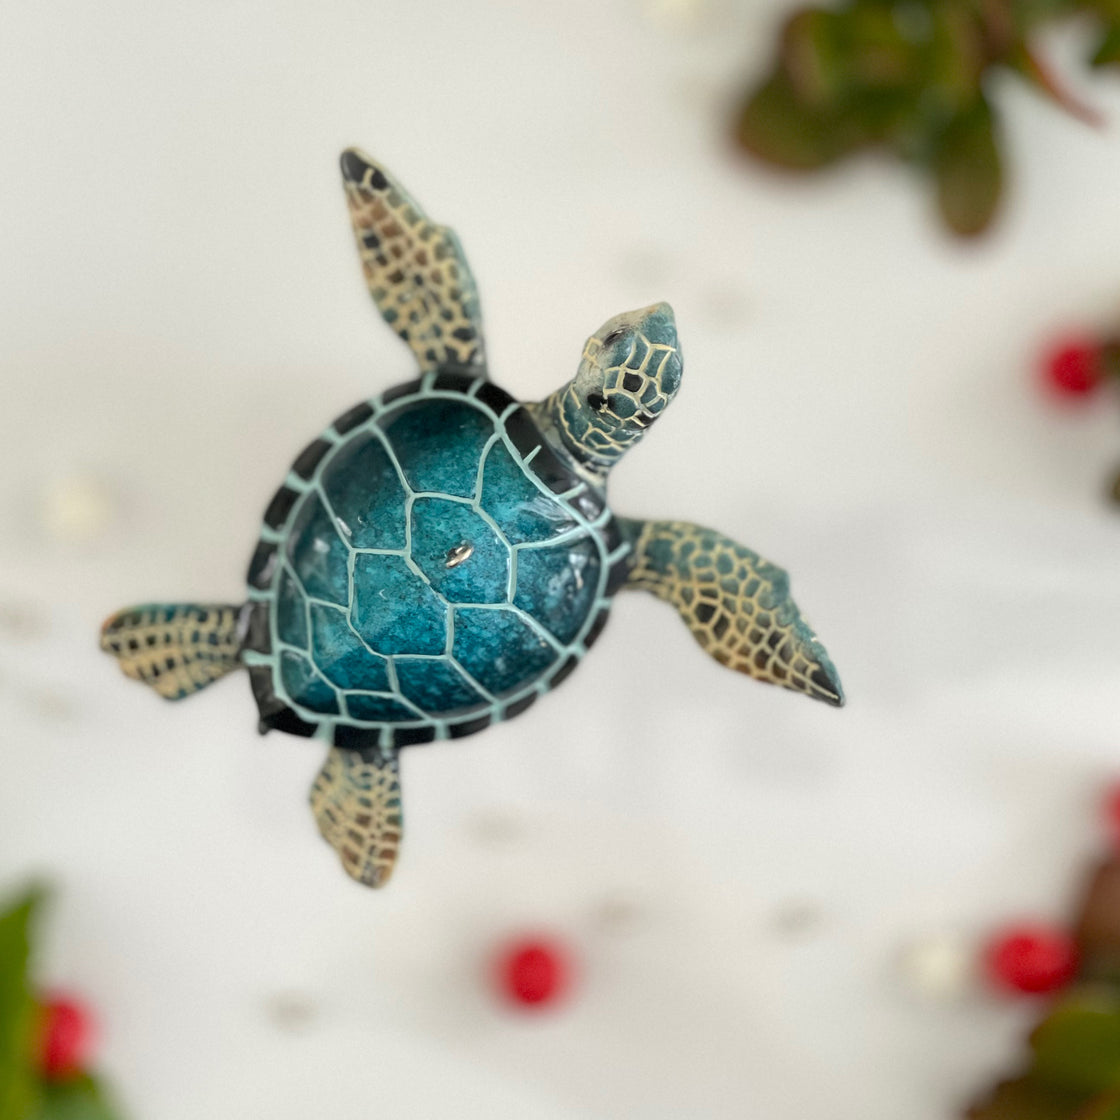 top view of blue sea turtle ornament looking like it's hovering or swimming between some green plants with red berries